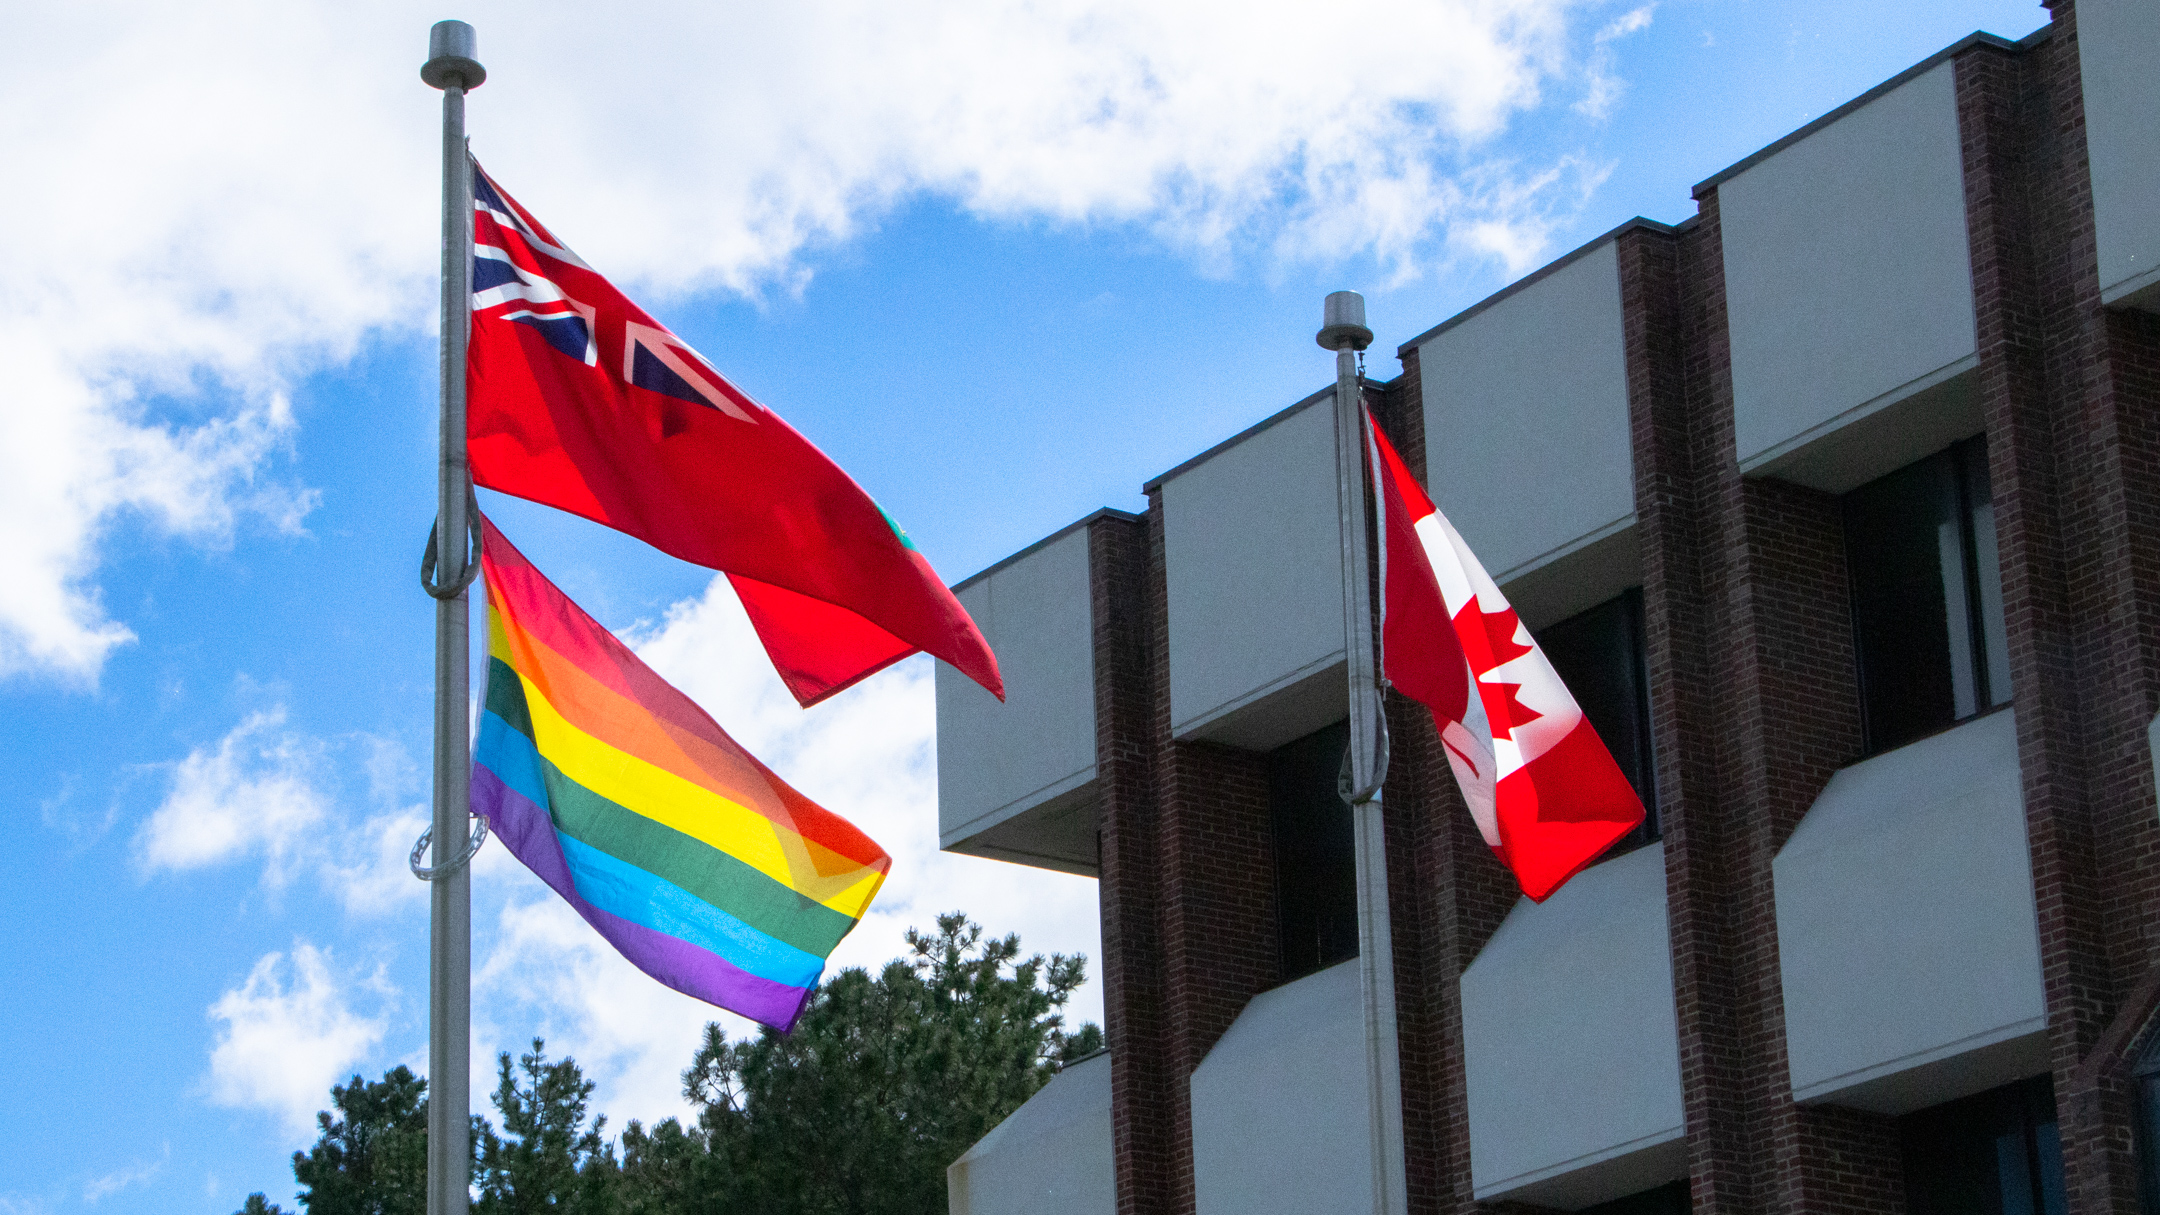 The Pride Flag flies beneath the Ontario flag at the Education Centre